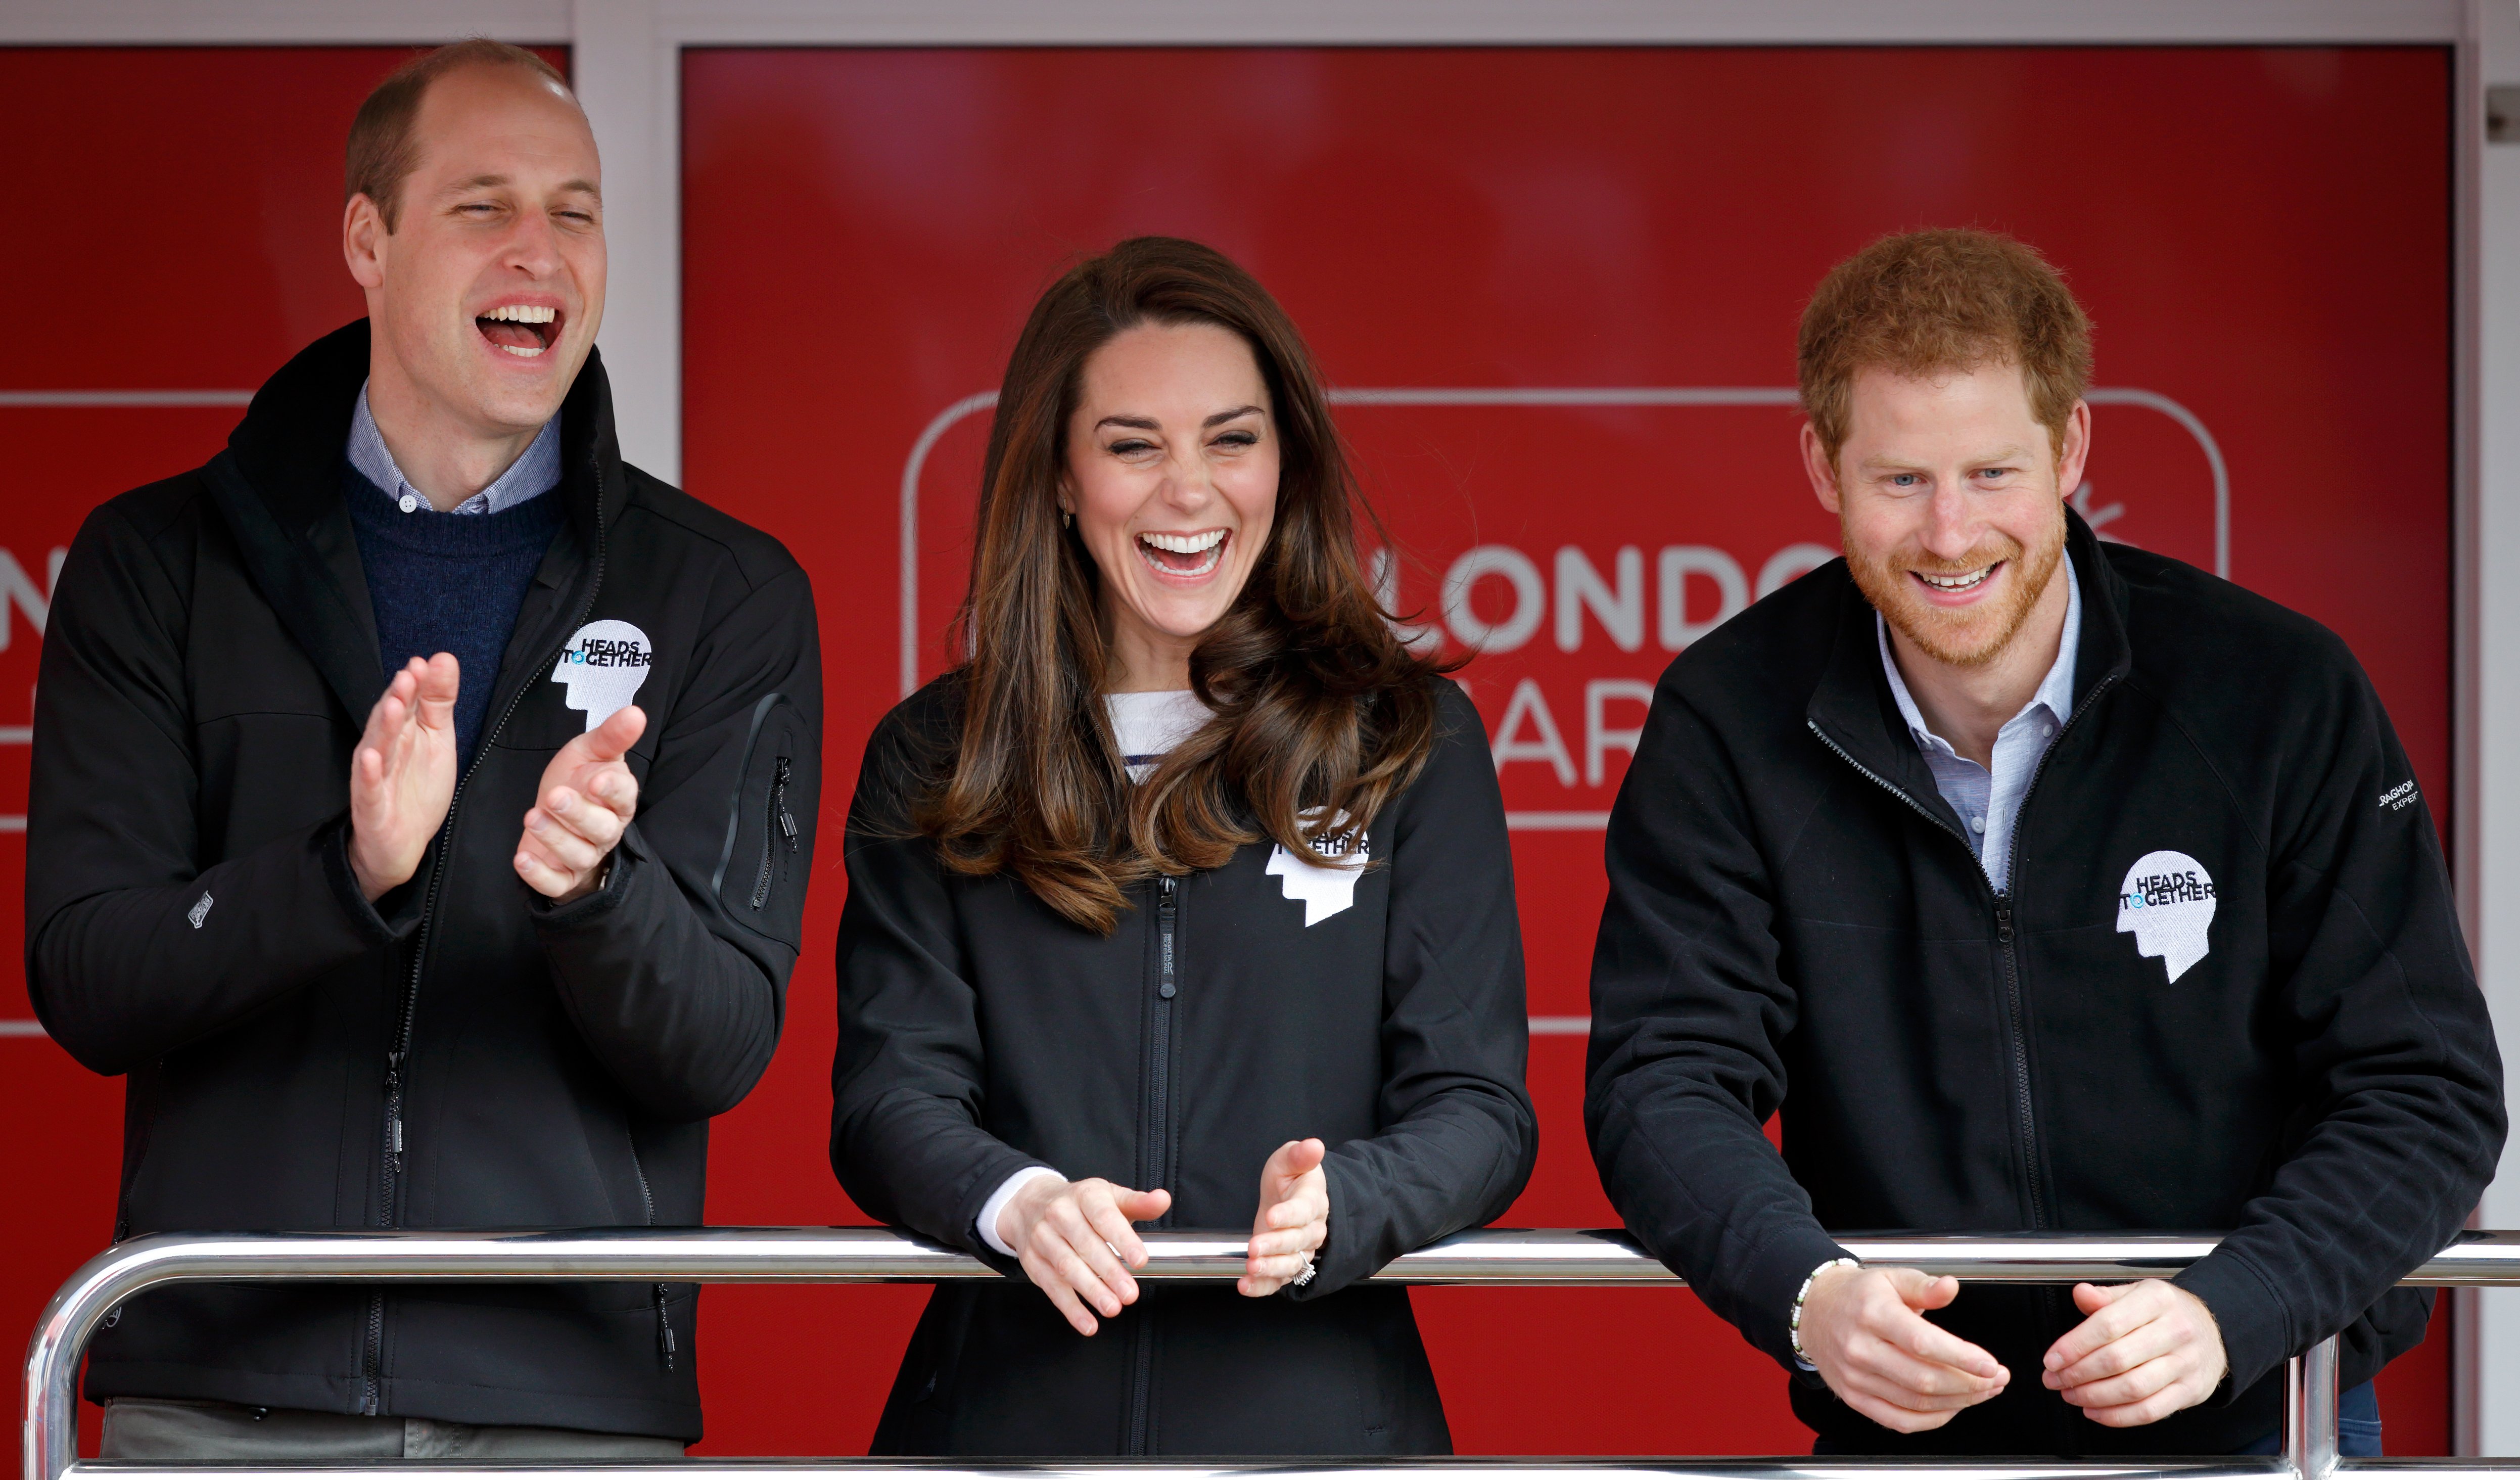 Prince William, Prince of Wales, Catherine, Princess of Wales and Prince Harry cheer on runners as they start the 2017 Virgin Money London Marathon on April 23, 2017 in London, England. | Source: Getty Images